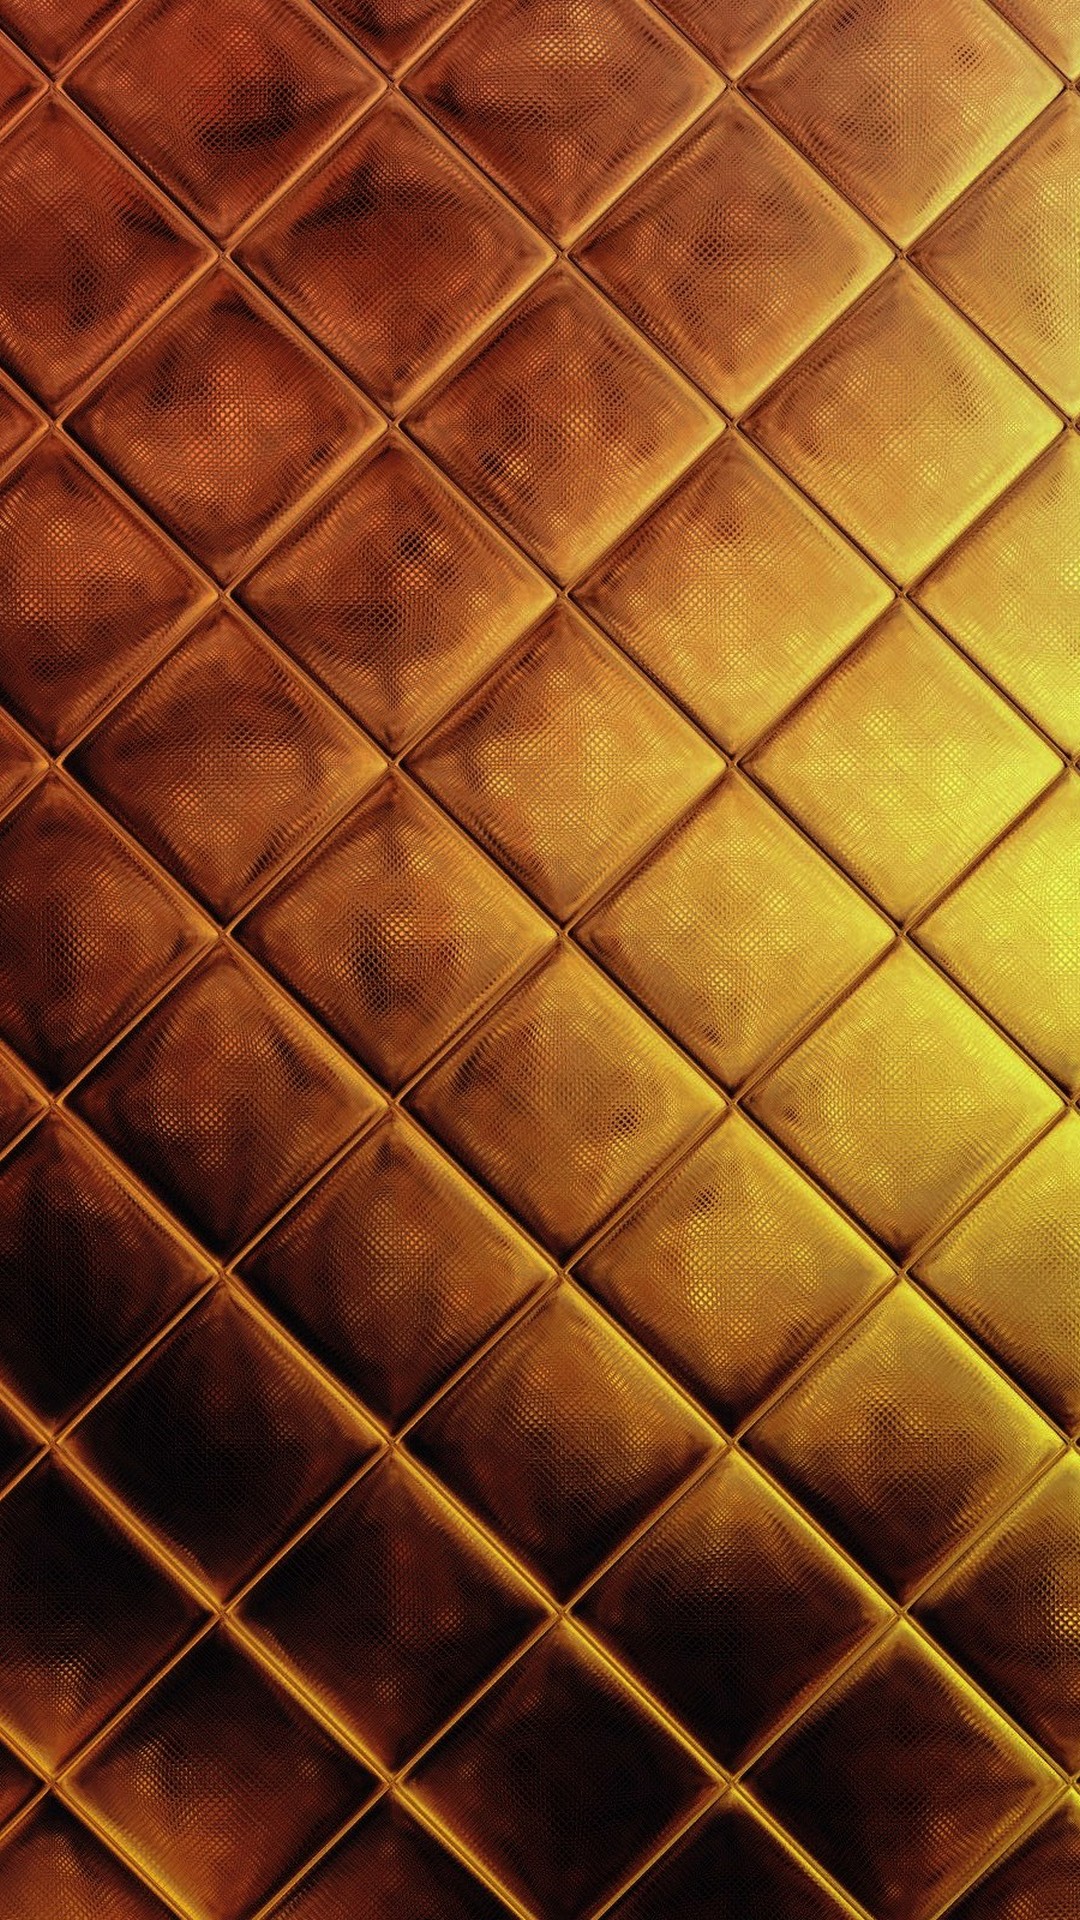 Gold Pattern iPhone Wallpaper with HD Resolution 1080X1920